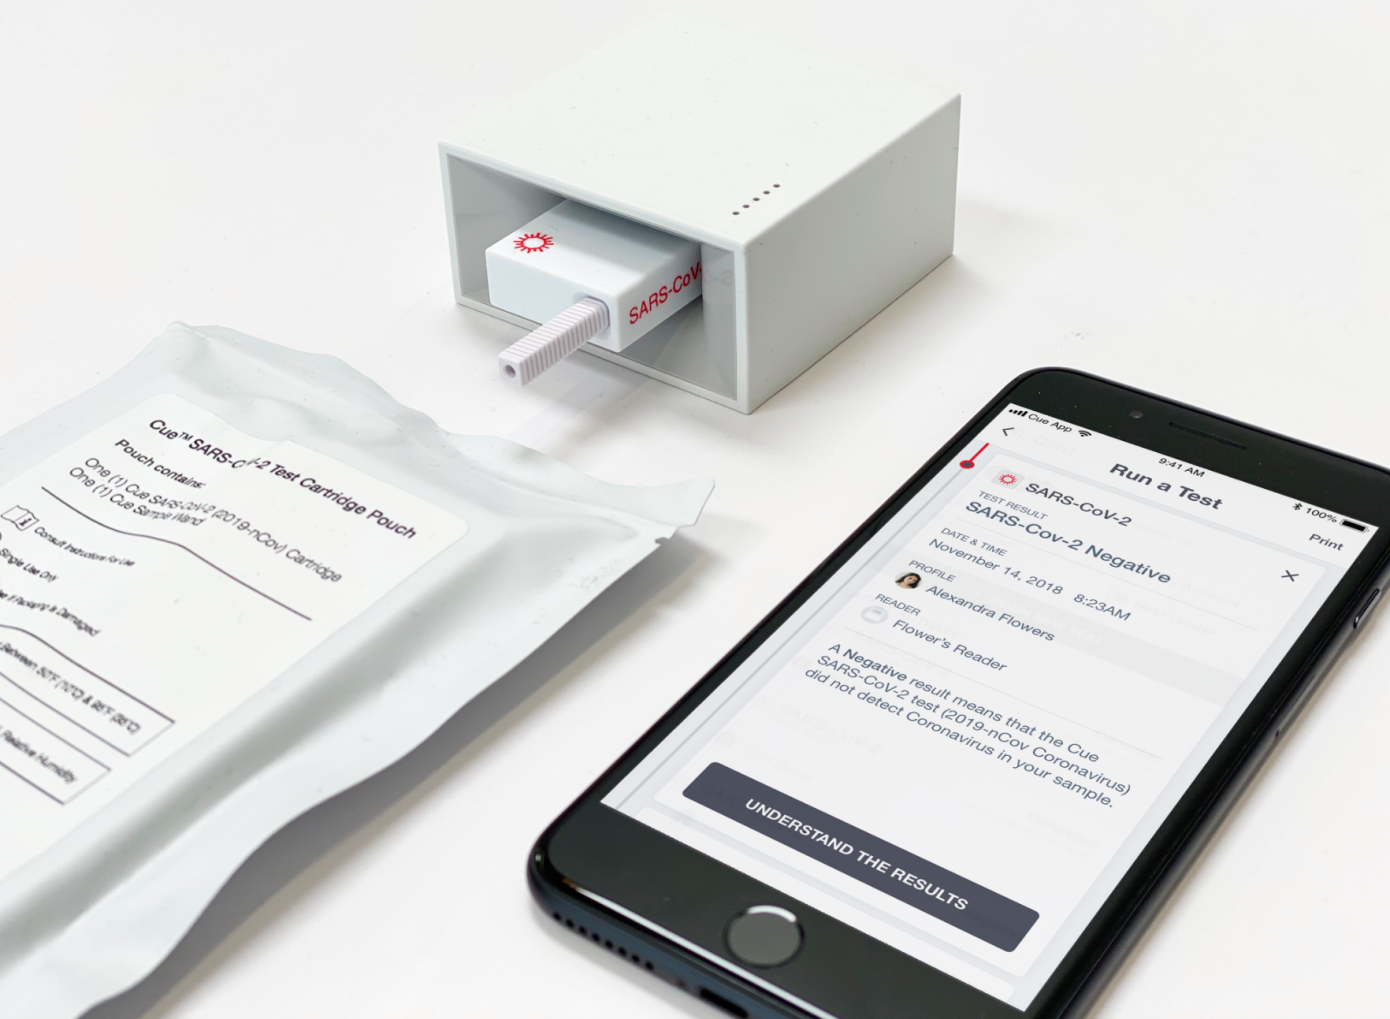 Cue Health awarded $13 million government contract to develop portable, point-of-care COVID-19 test